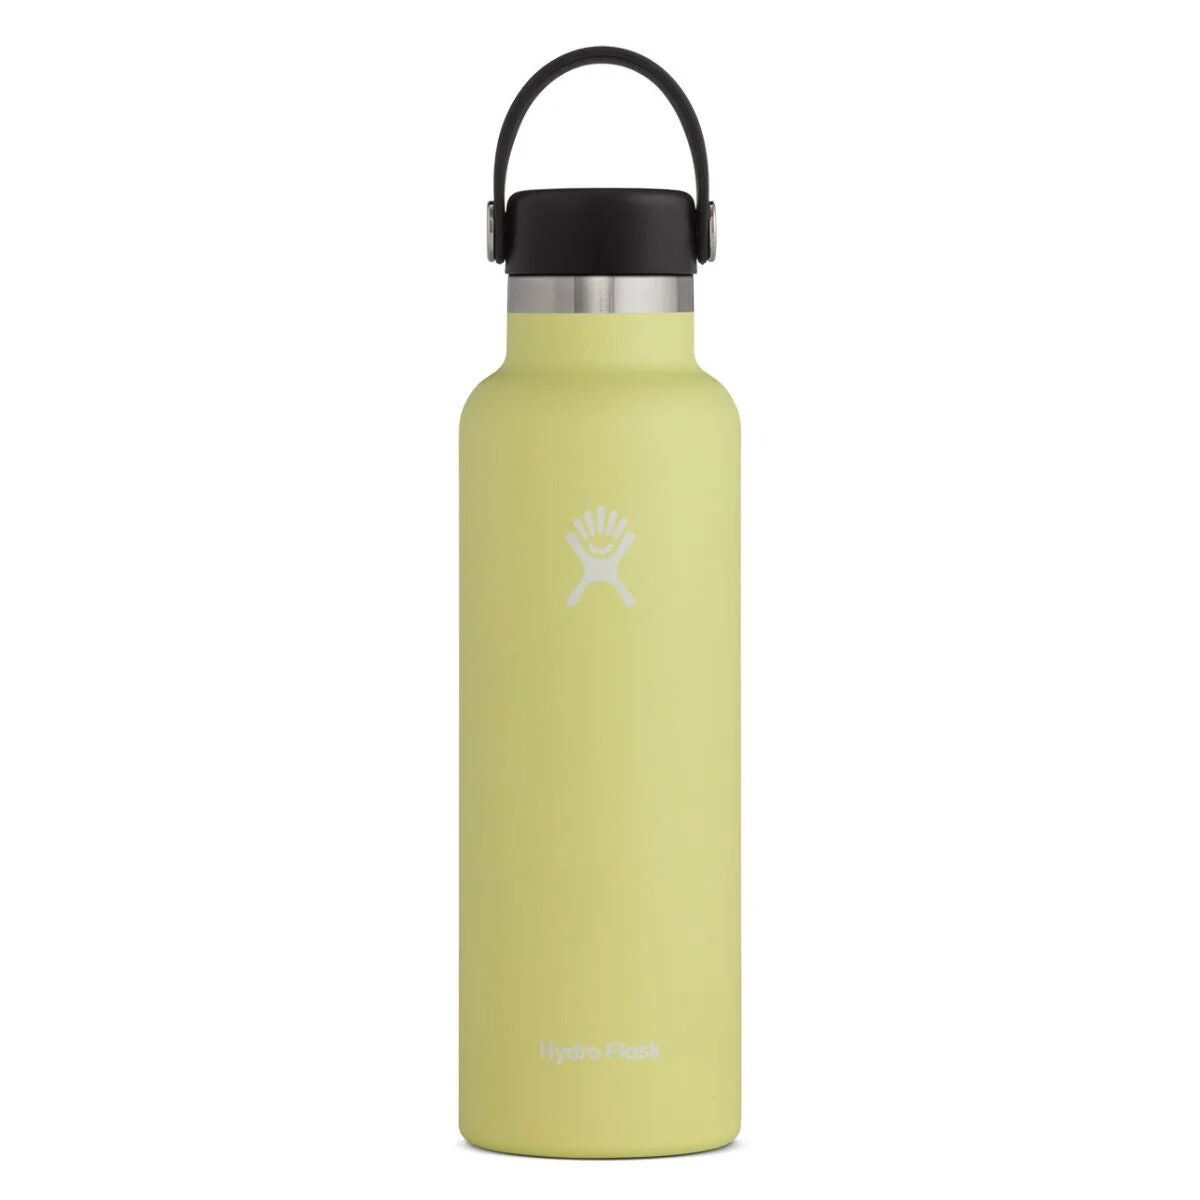 Hydro Flask Standard Mouth bottle 0.71l/24oz - BPA Free Stainless Steel